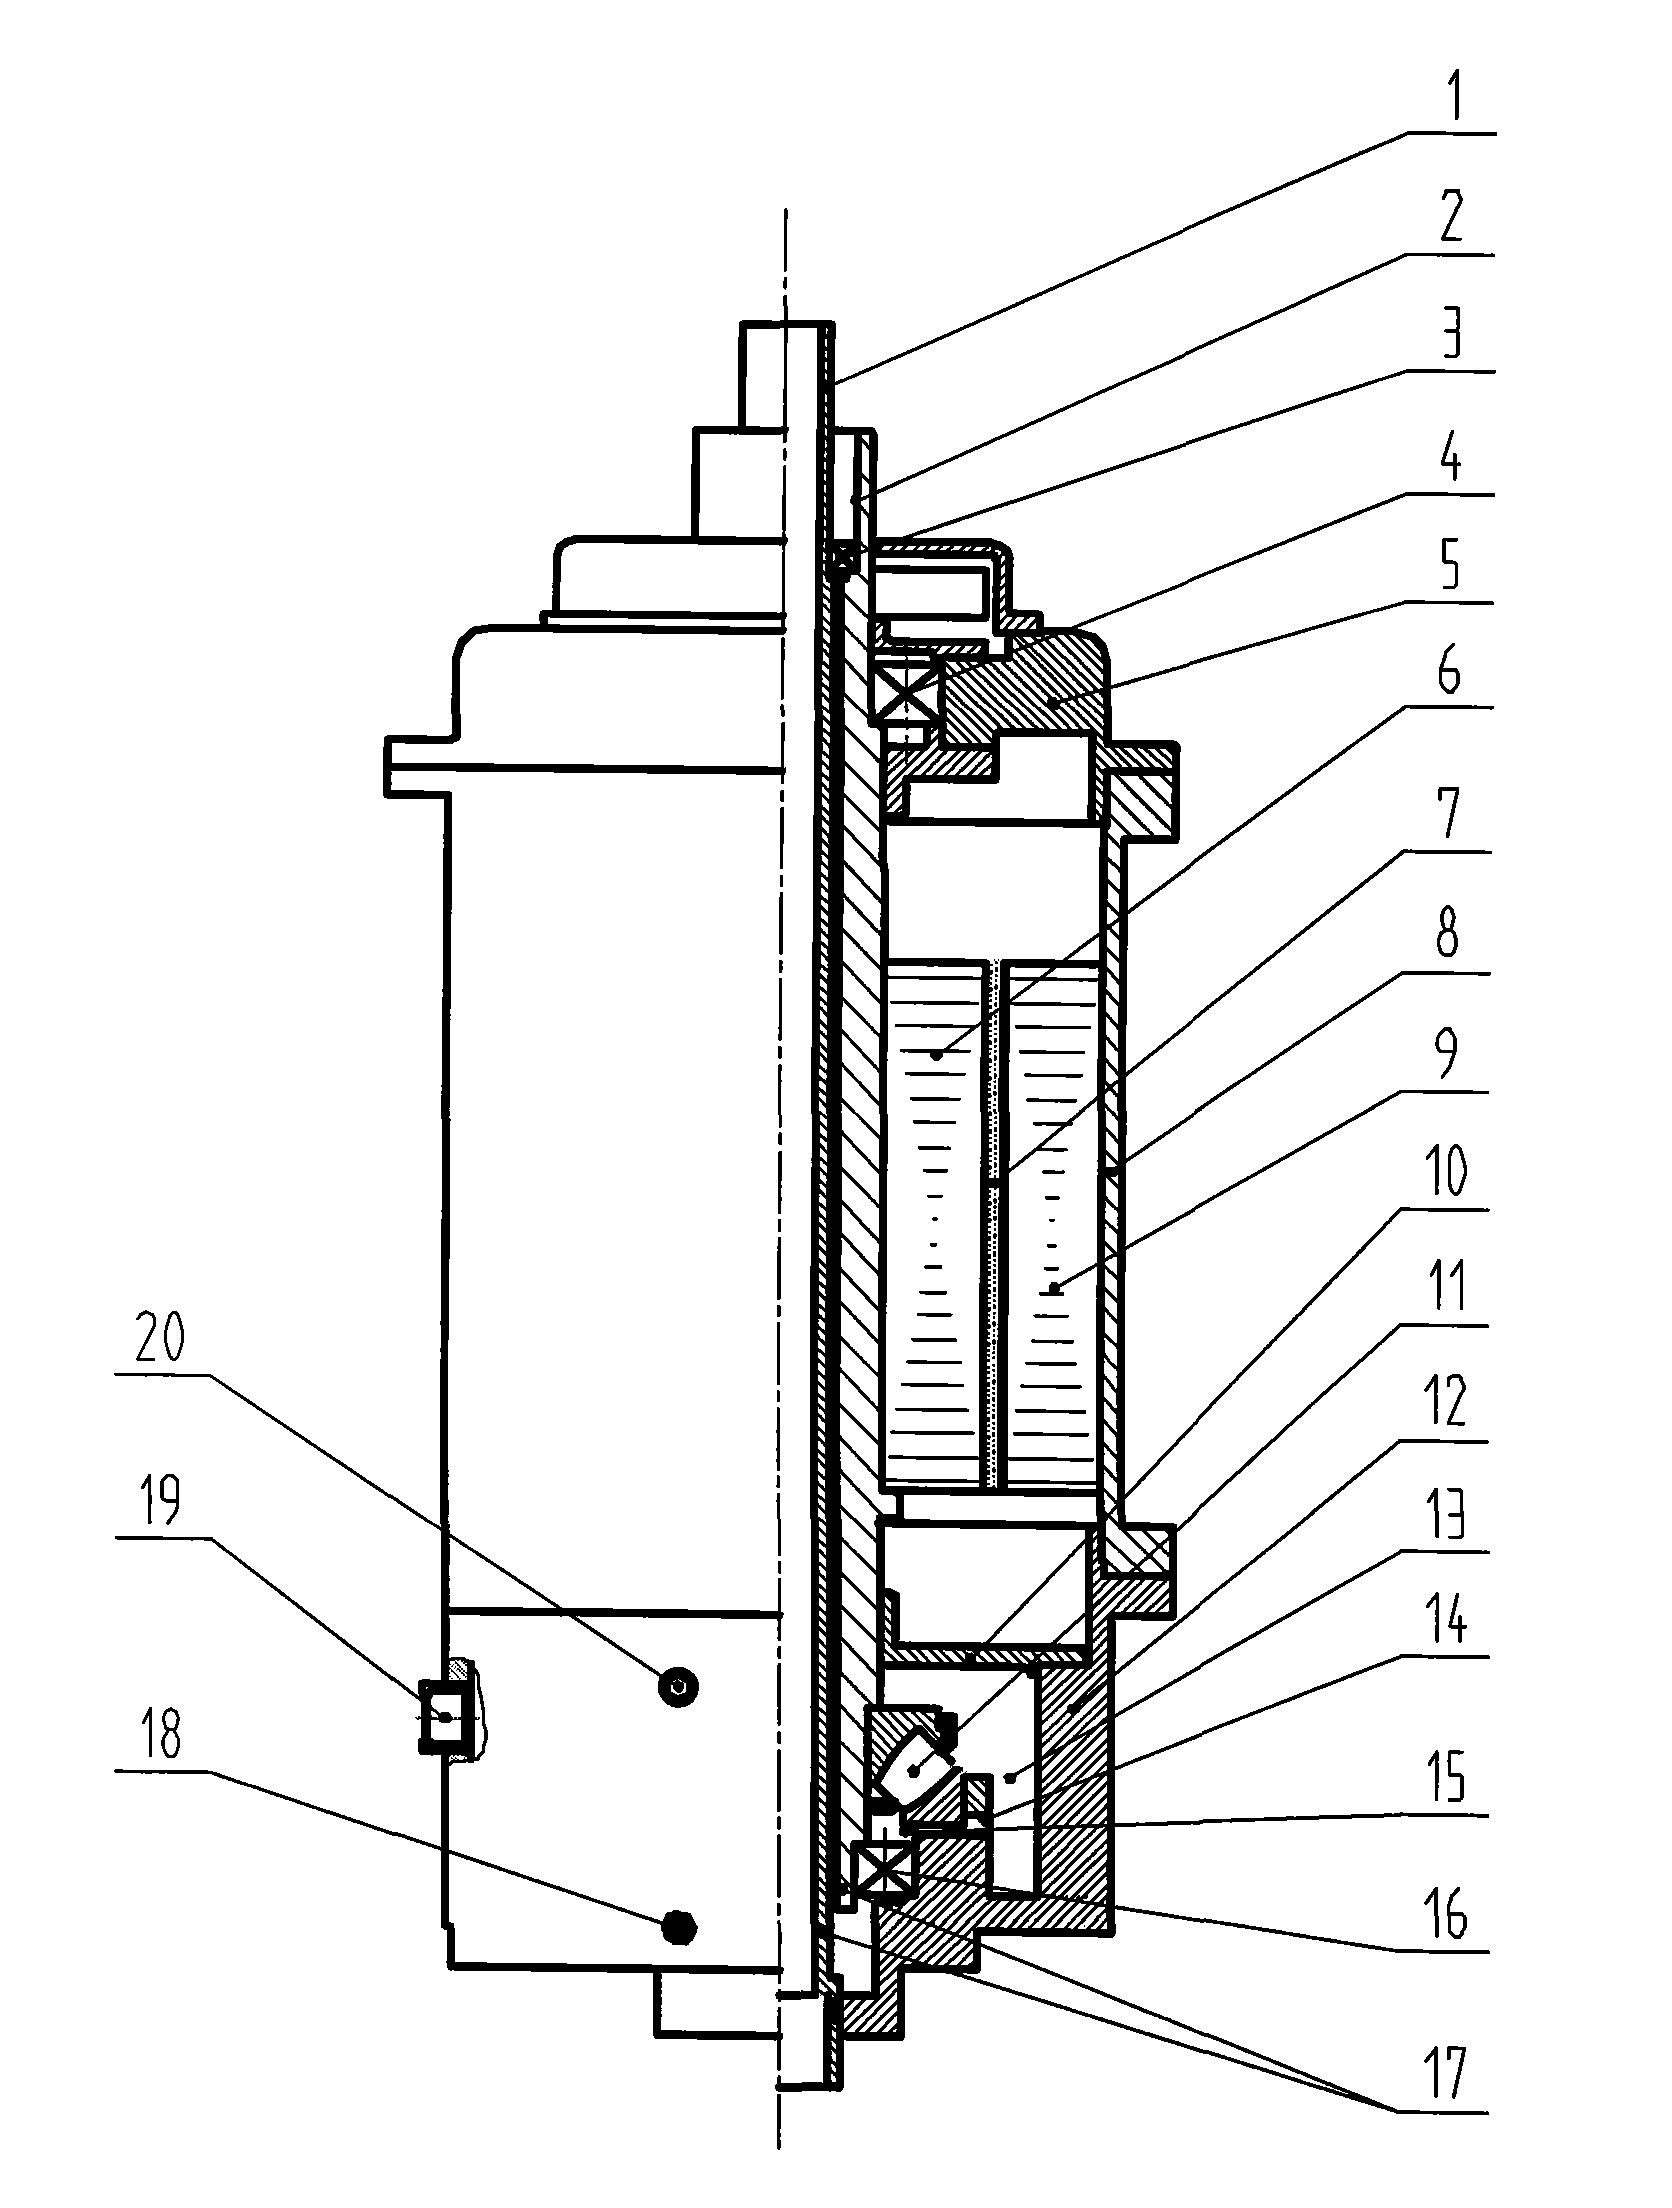 Permanent magnet direct driving motor with large axial directional load